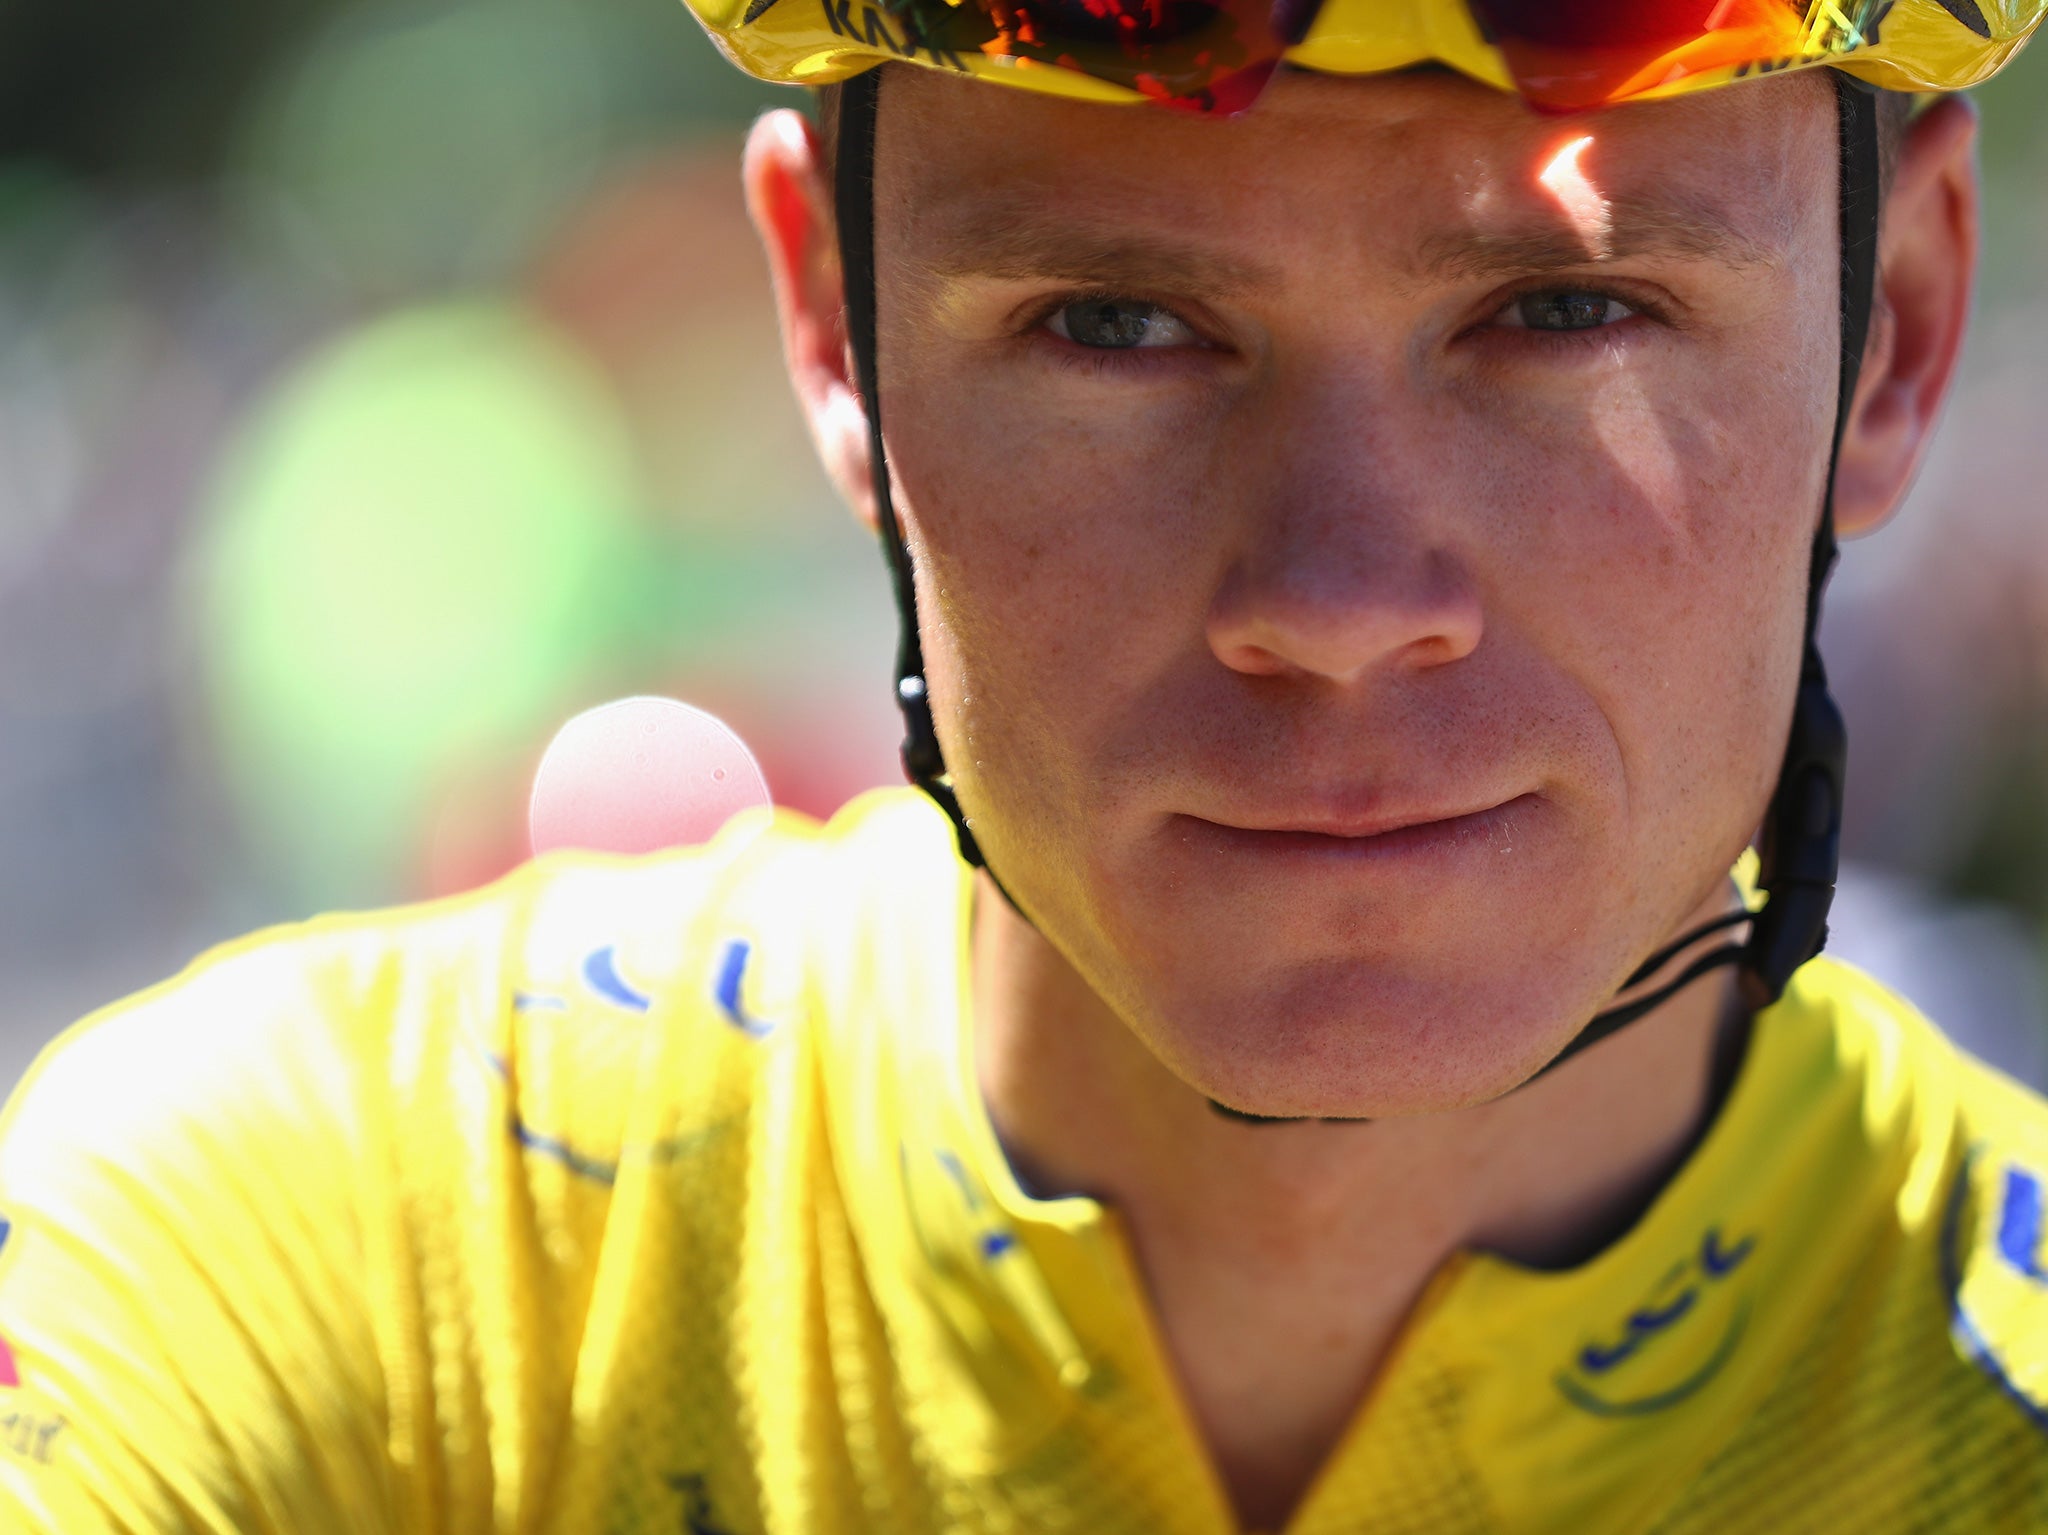 At the age of 14, Froome moved to one of South Africa’s top boarding schools